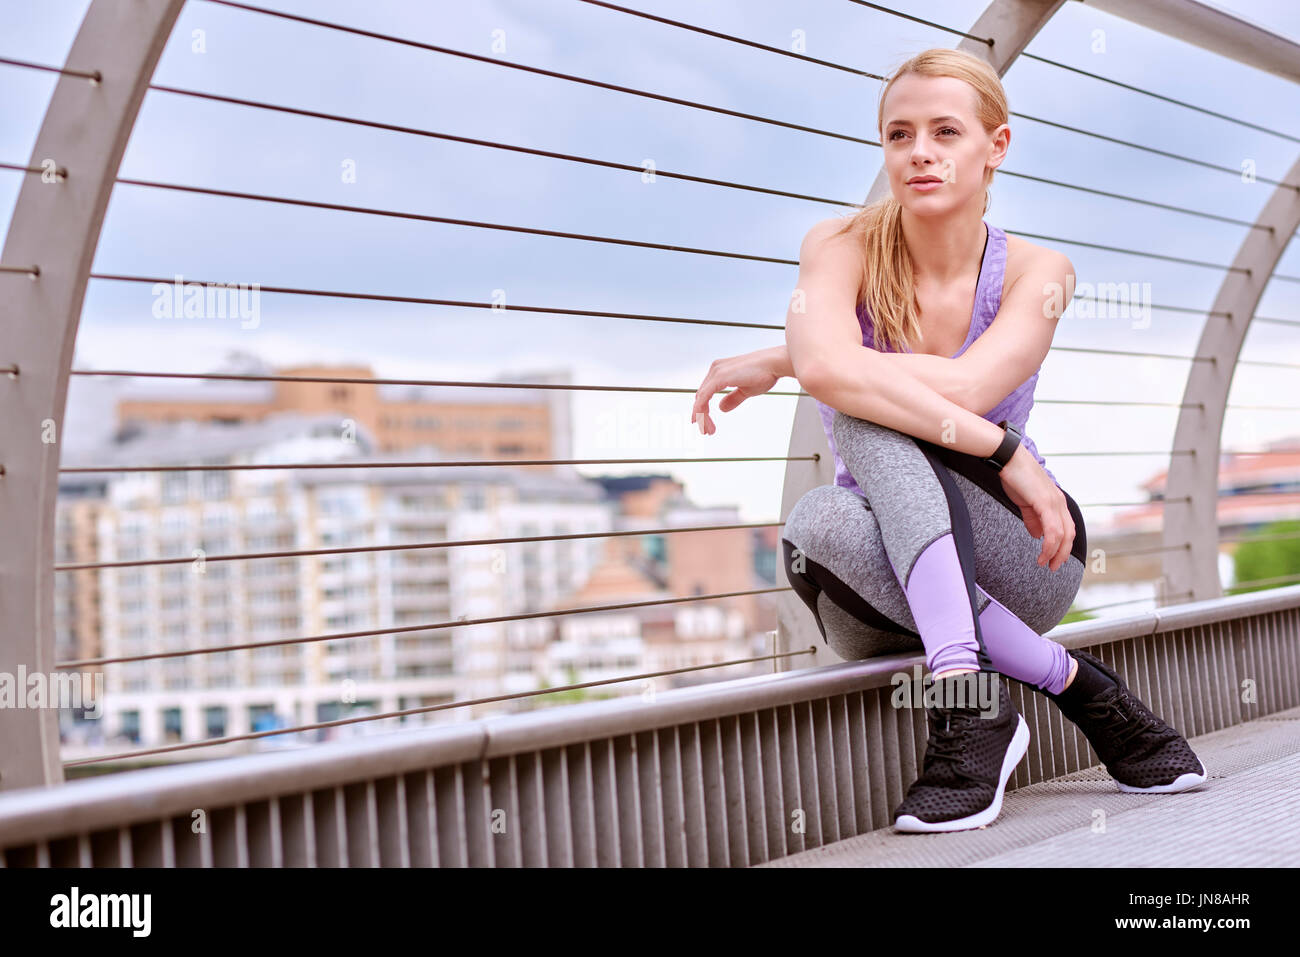 A young woman stops to relax while exercising in the City Stock Photo